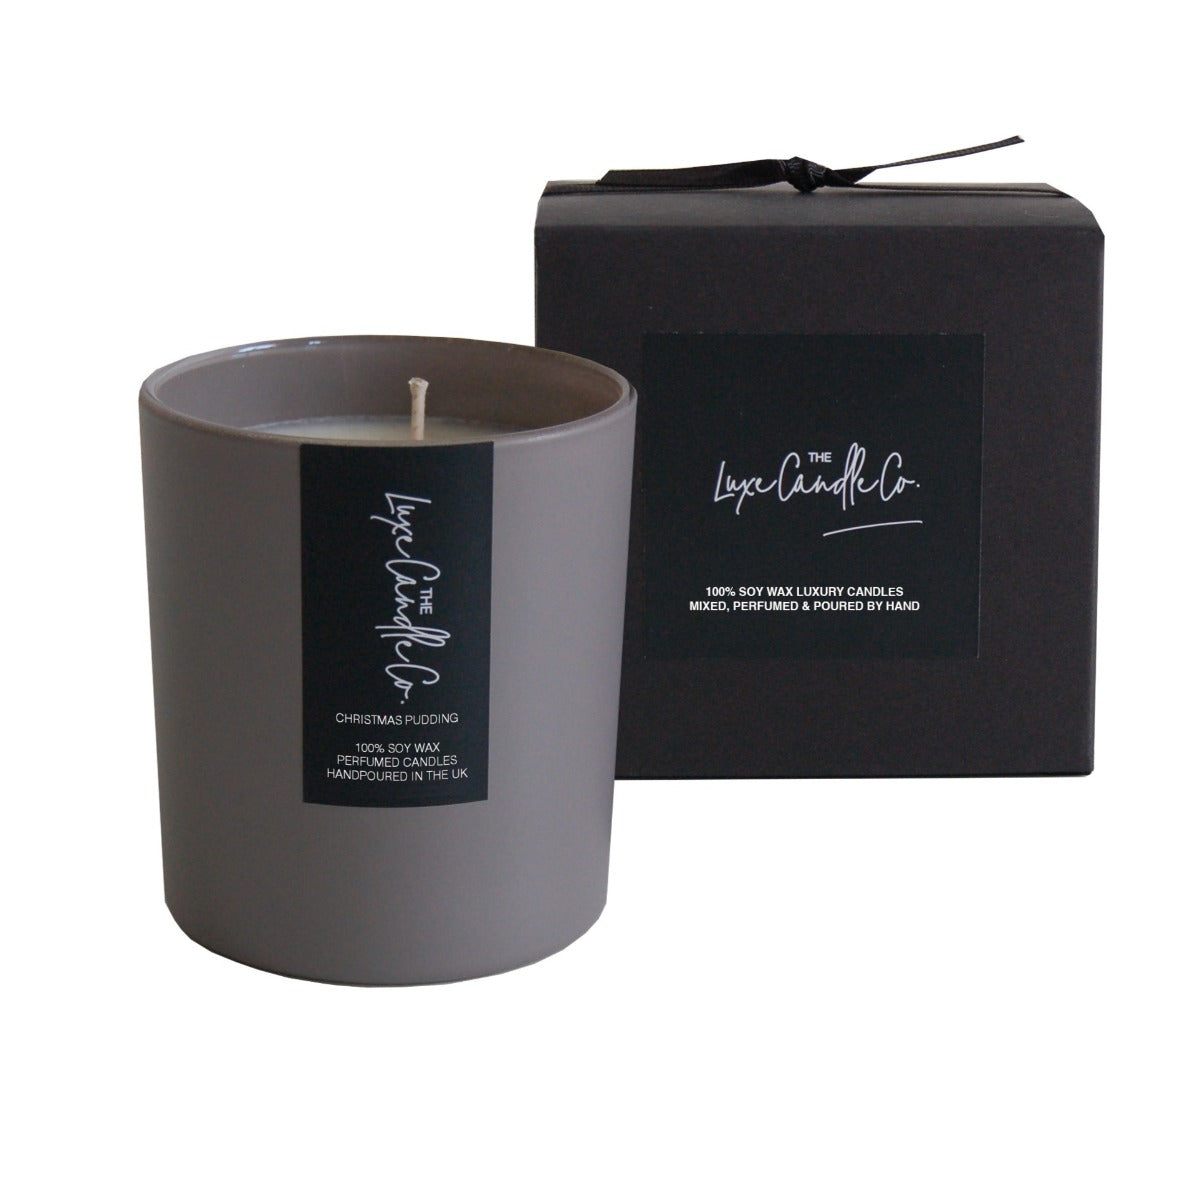 Grey Christmas Pudding scented soy wax candle | by The Luxe Candle Co